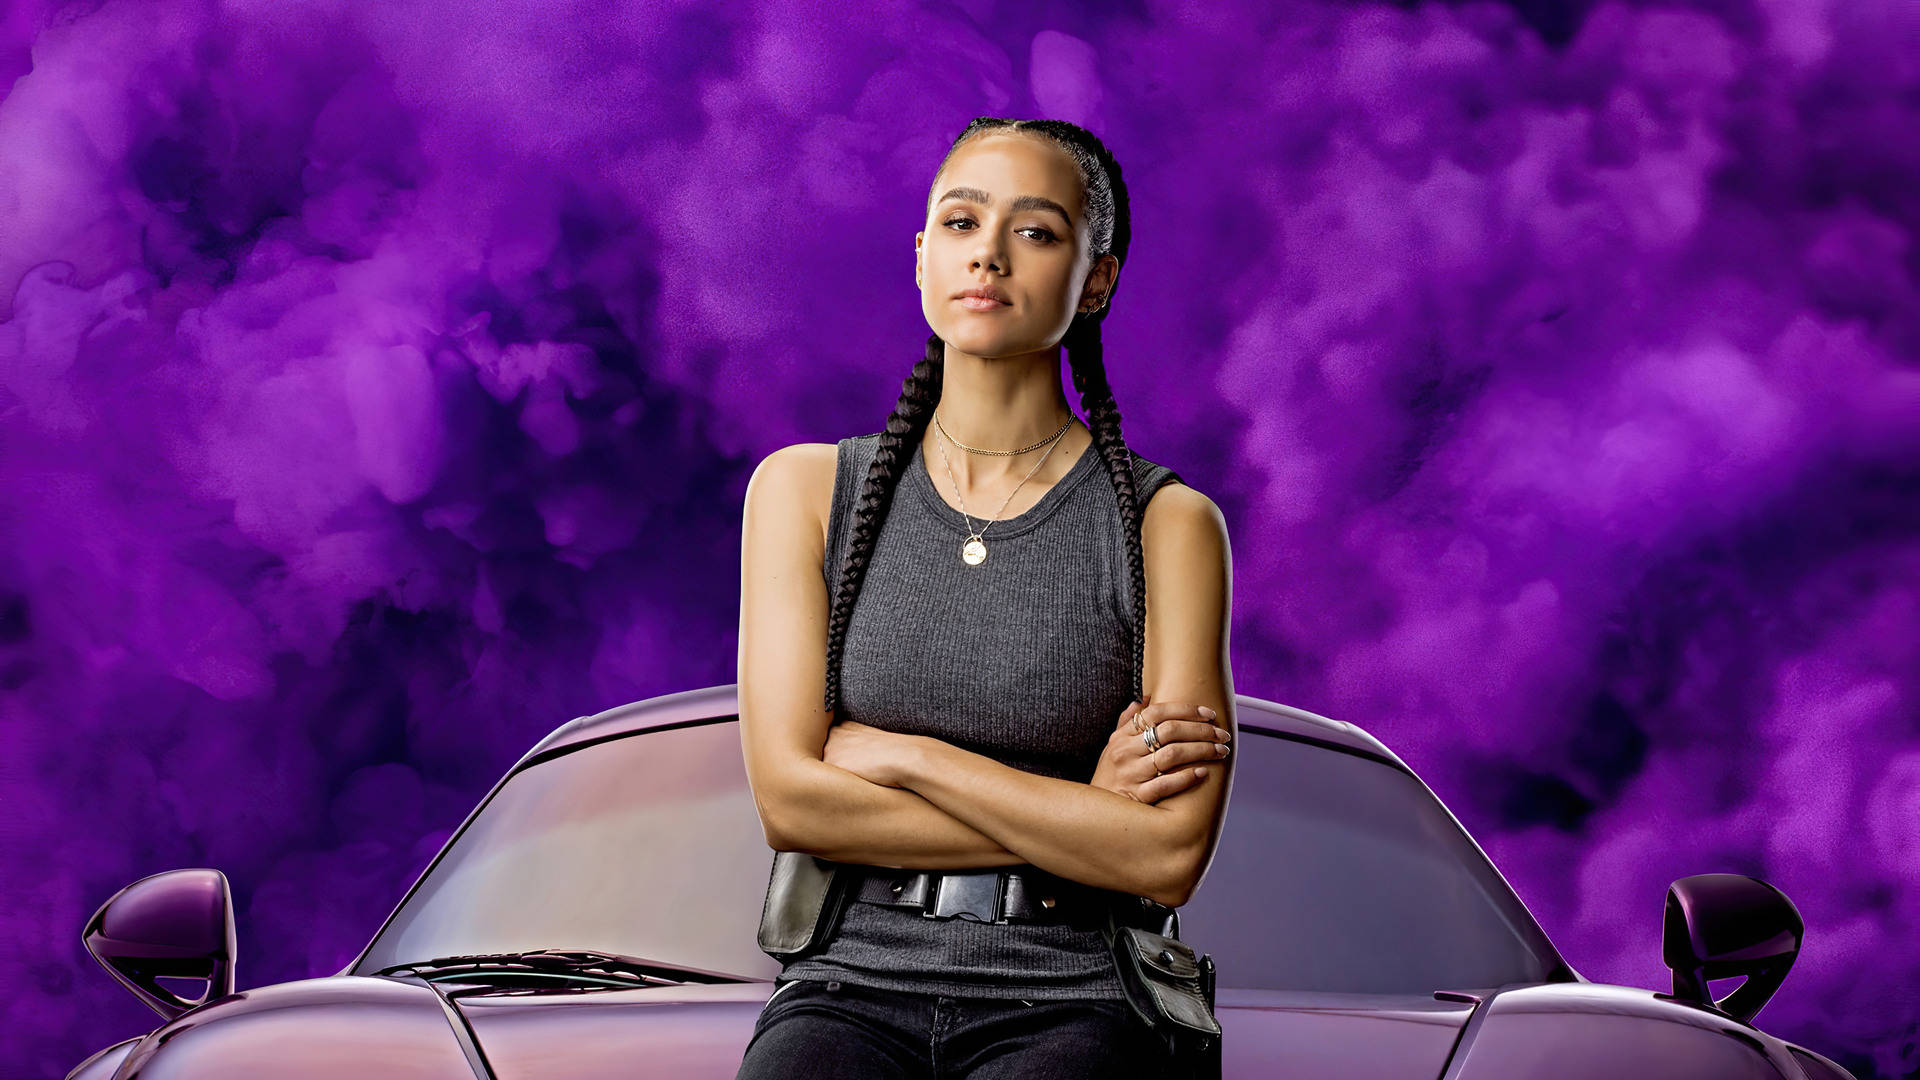 Nathalie Emmanuel Fast And Furious 9 Background